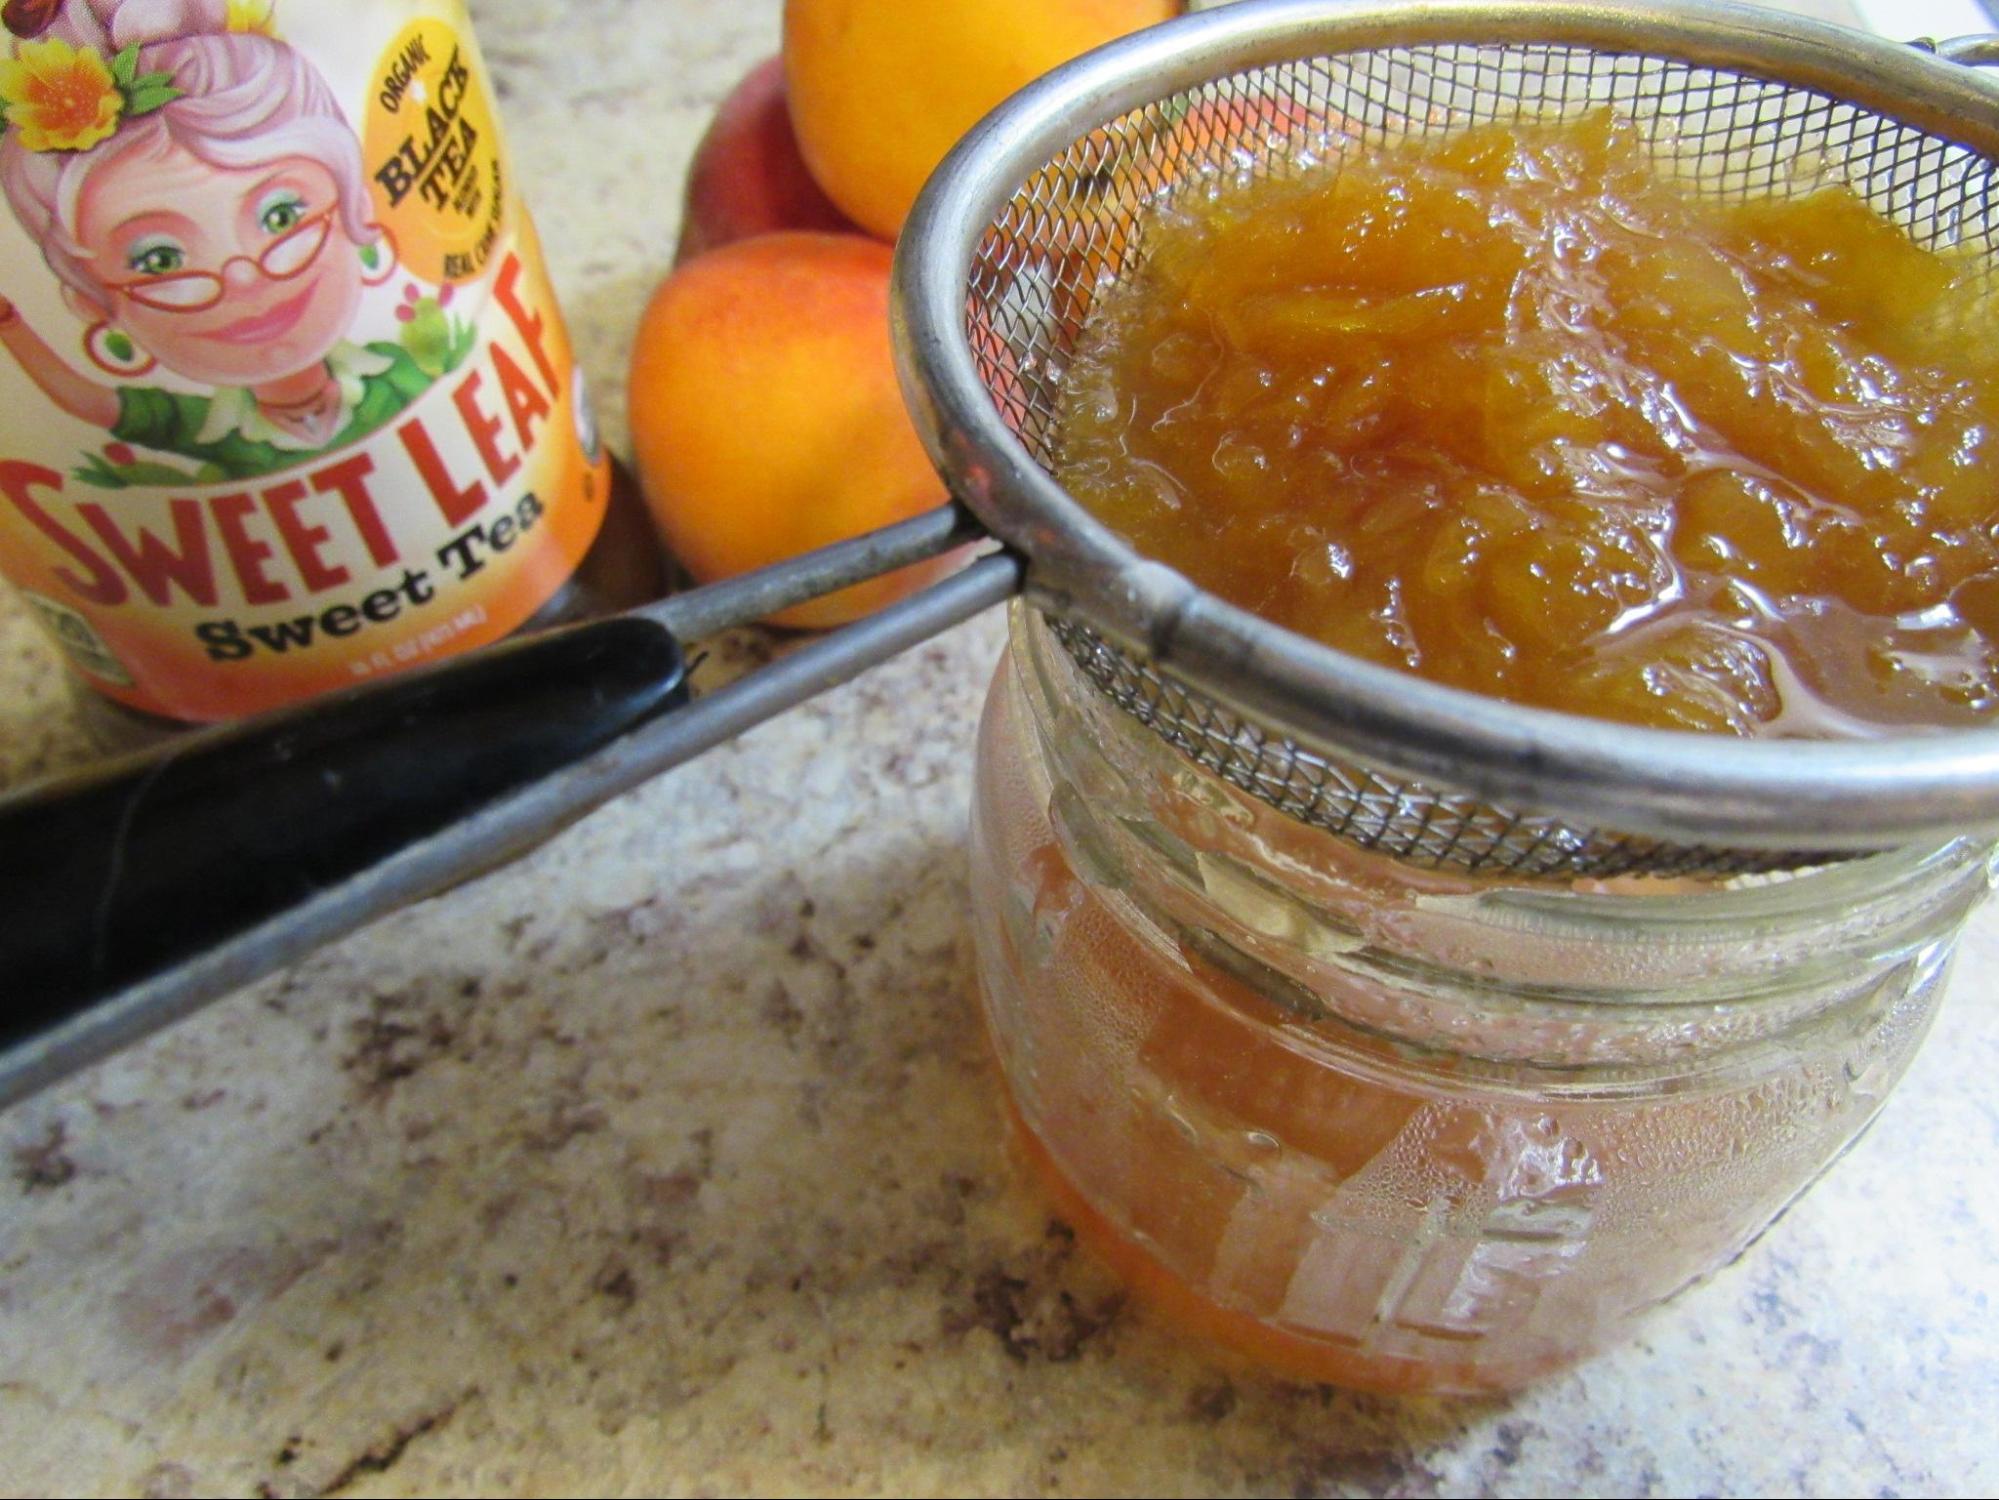 Step #3 When your fruit juice has reached a nice consistency, drain. Save the juice in a jar which will need to be refrigerated for a day.